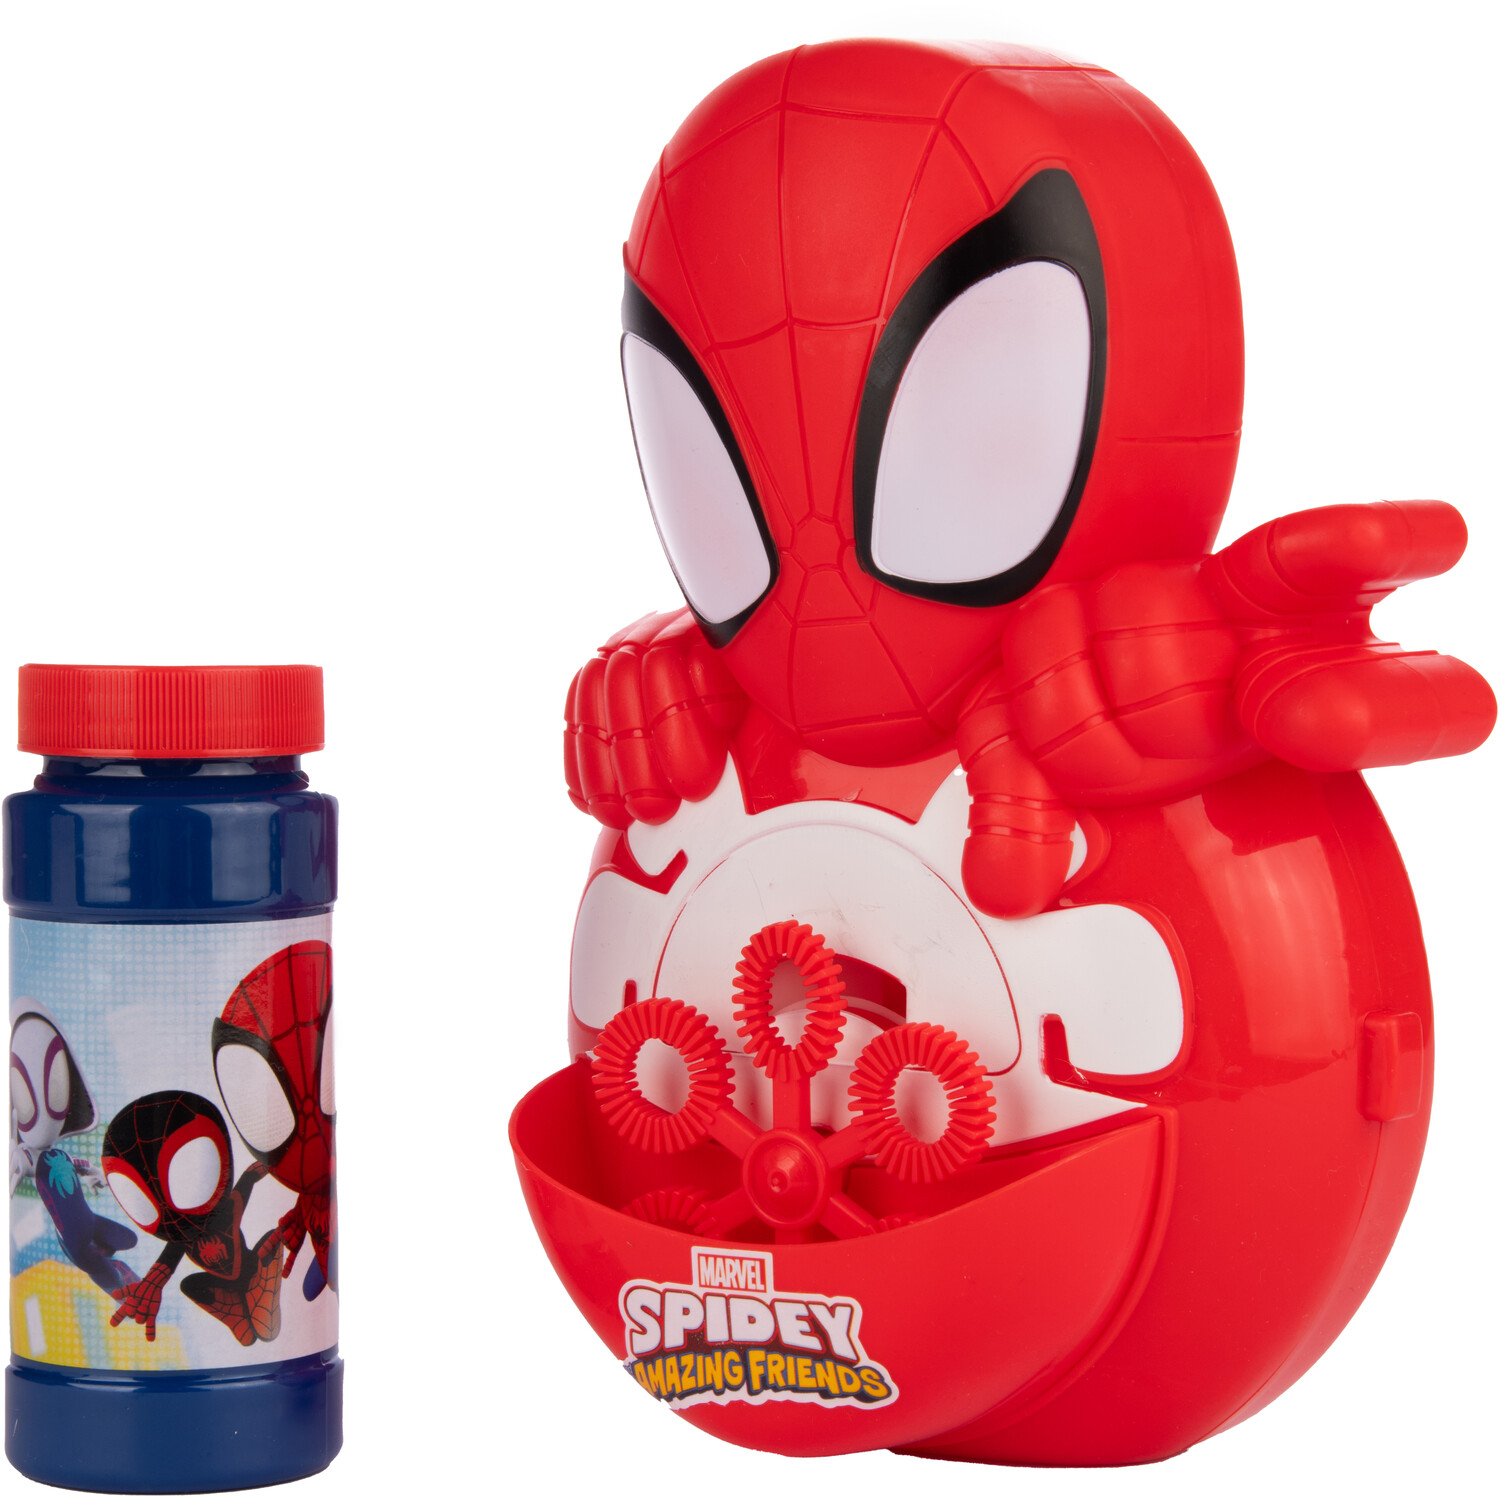 Spidey and his Amazing Friends Bubble Blower - Red Image 4